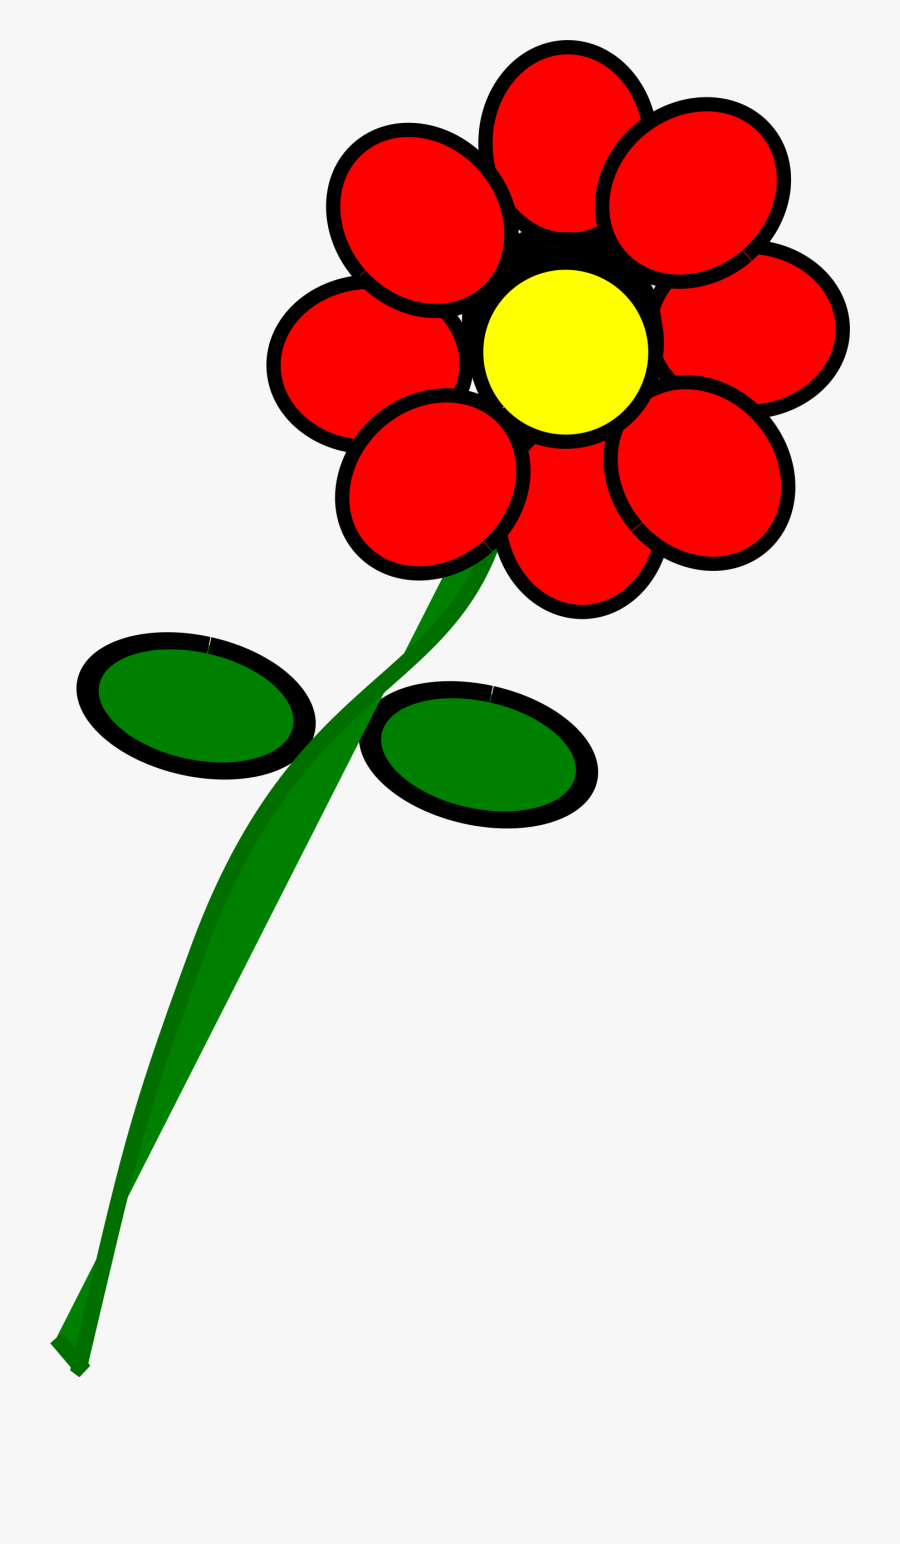 Flower 4 Red Clip Arts - 4 Red Flowers Clipart, Transparent Clipart